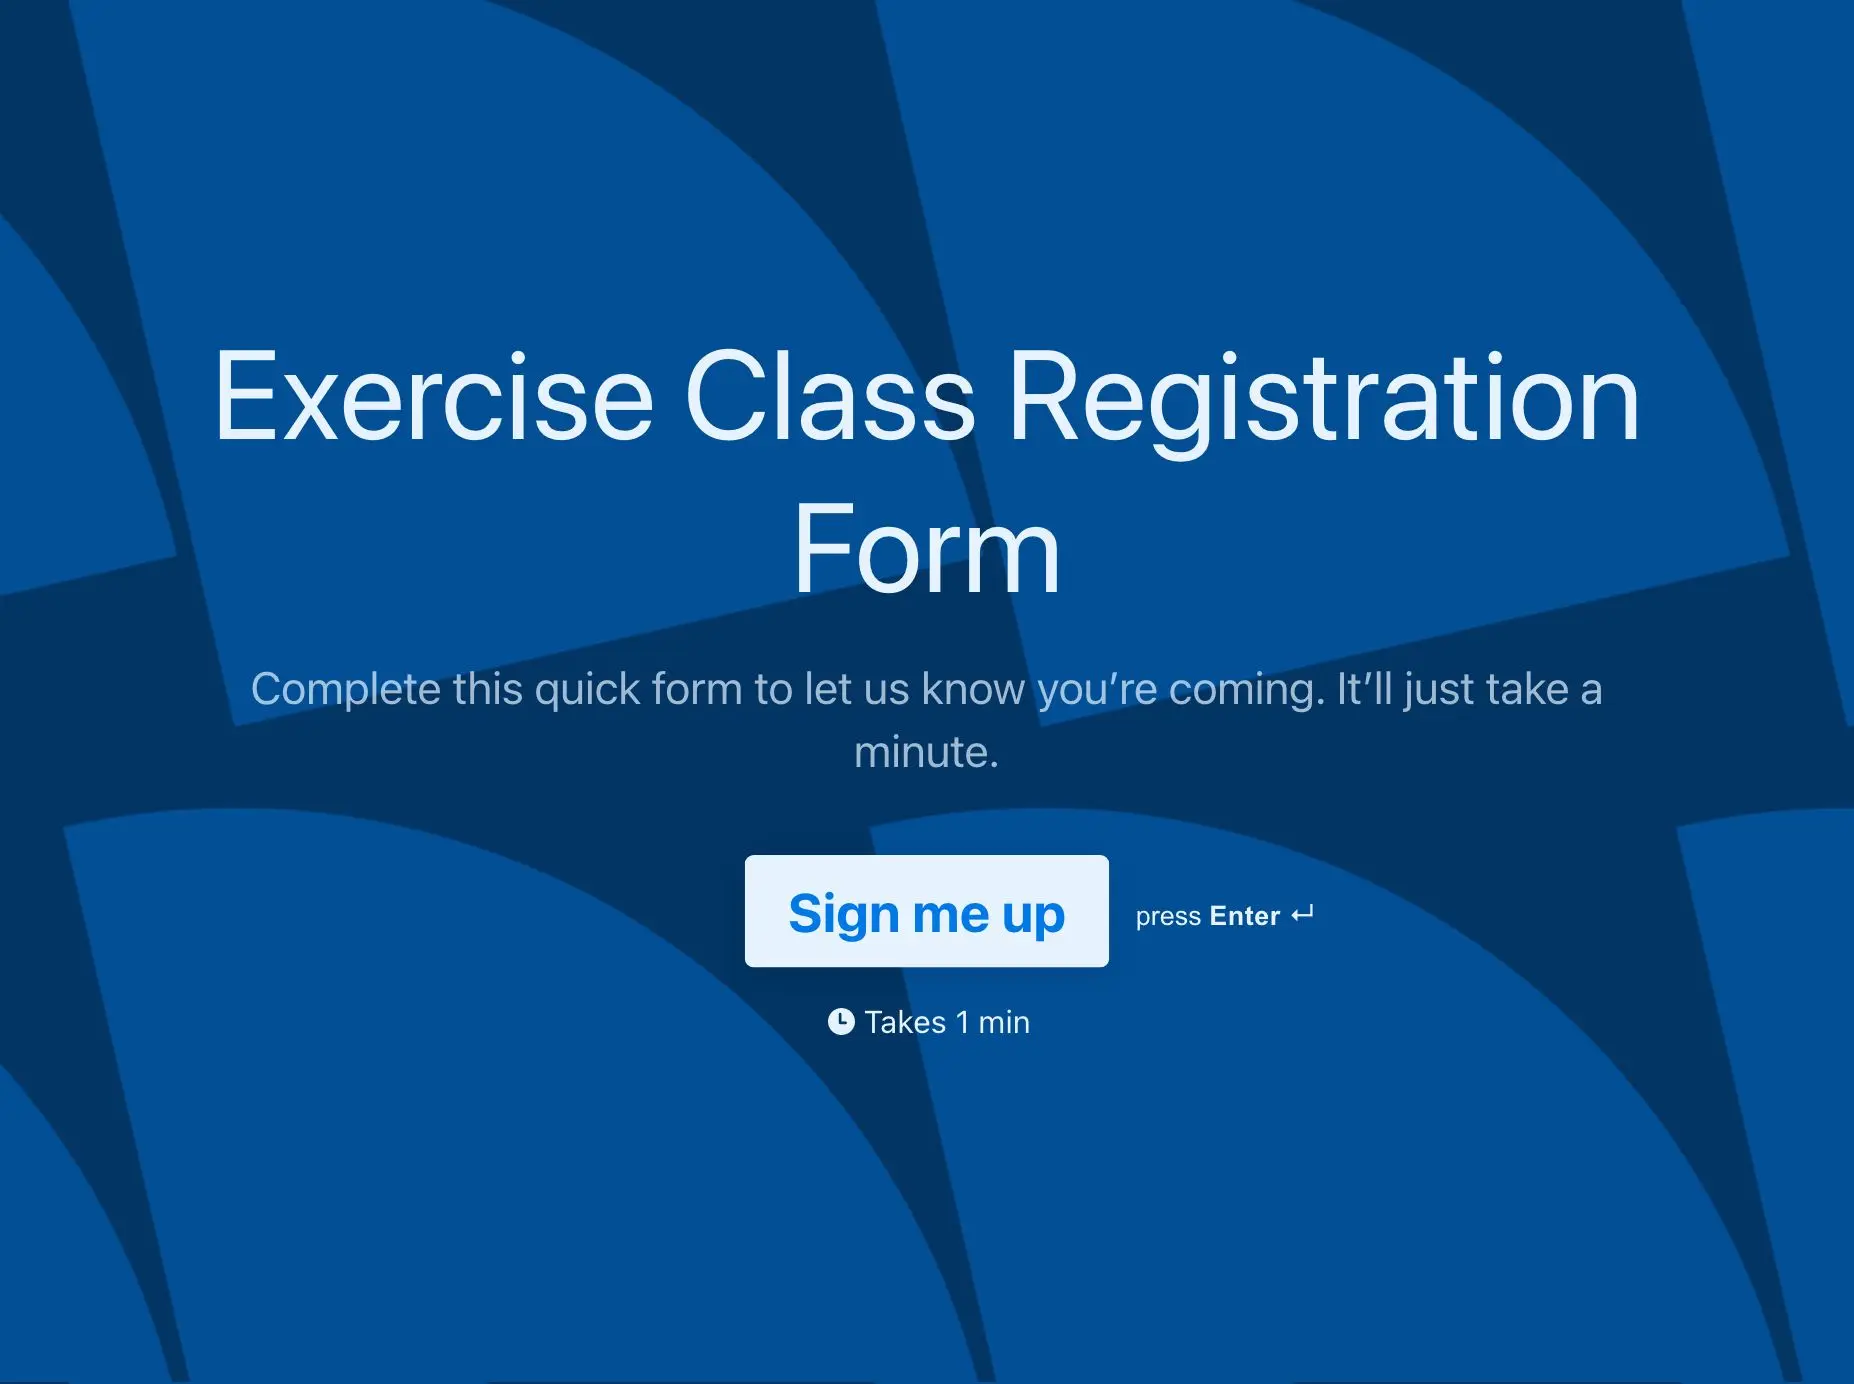 Exercise Class Registration Form Template Hero